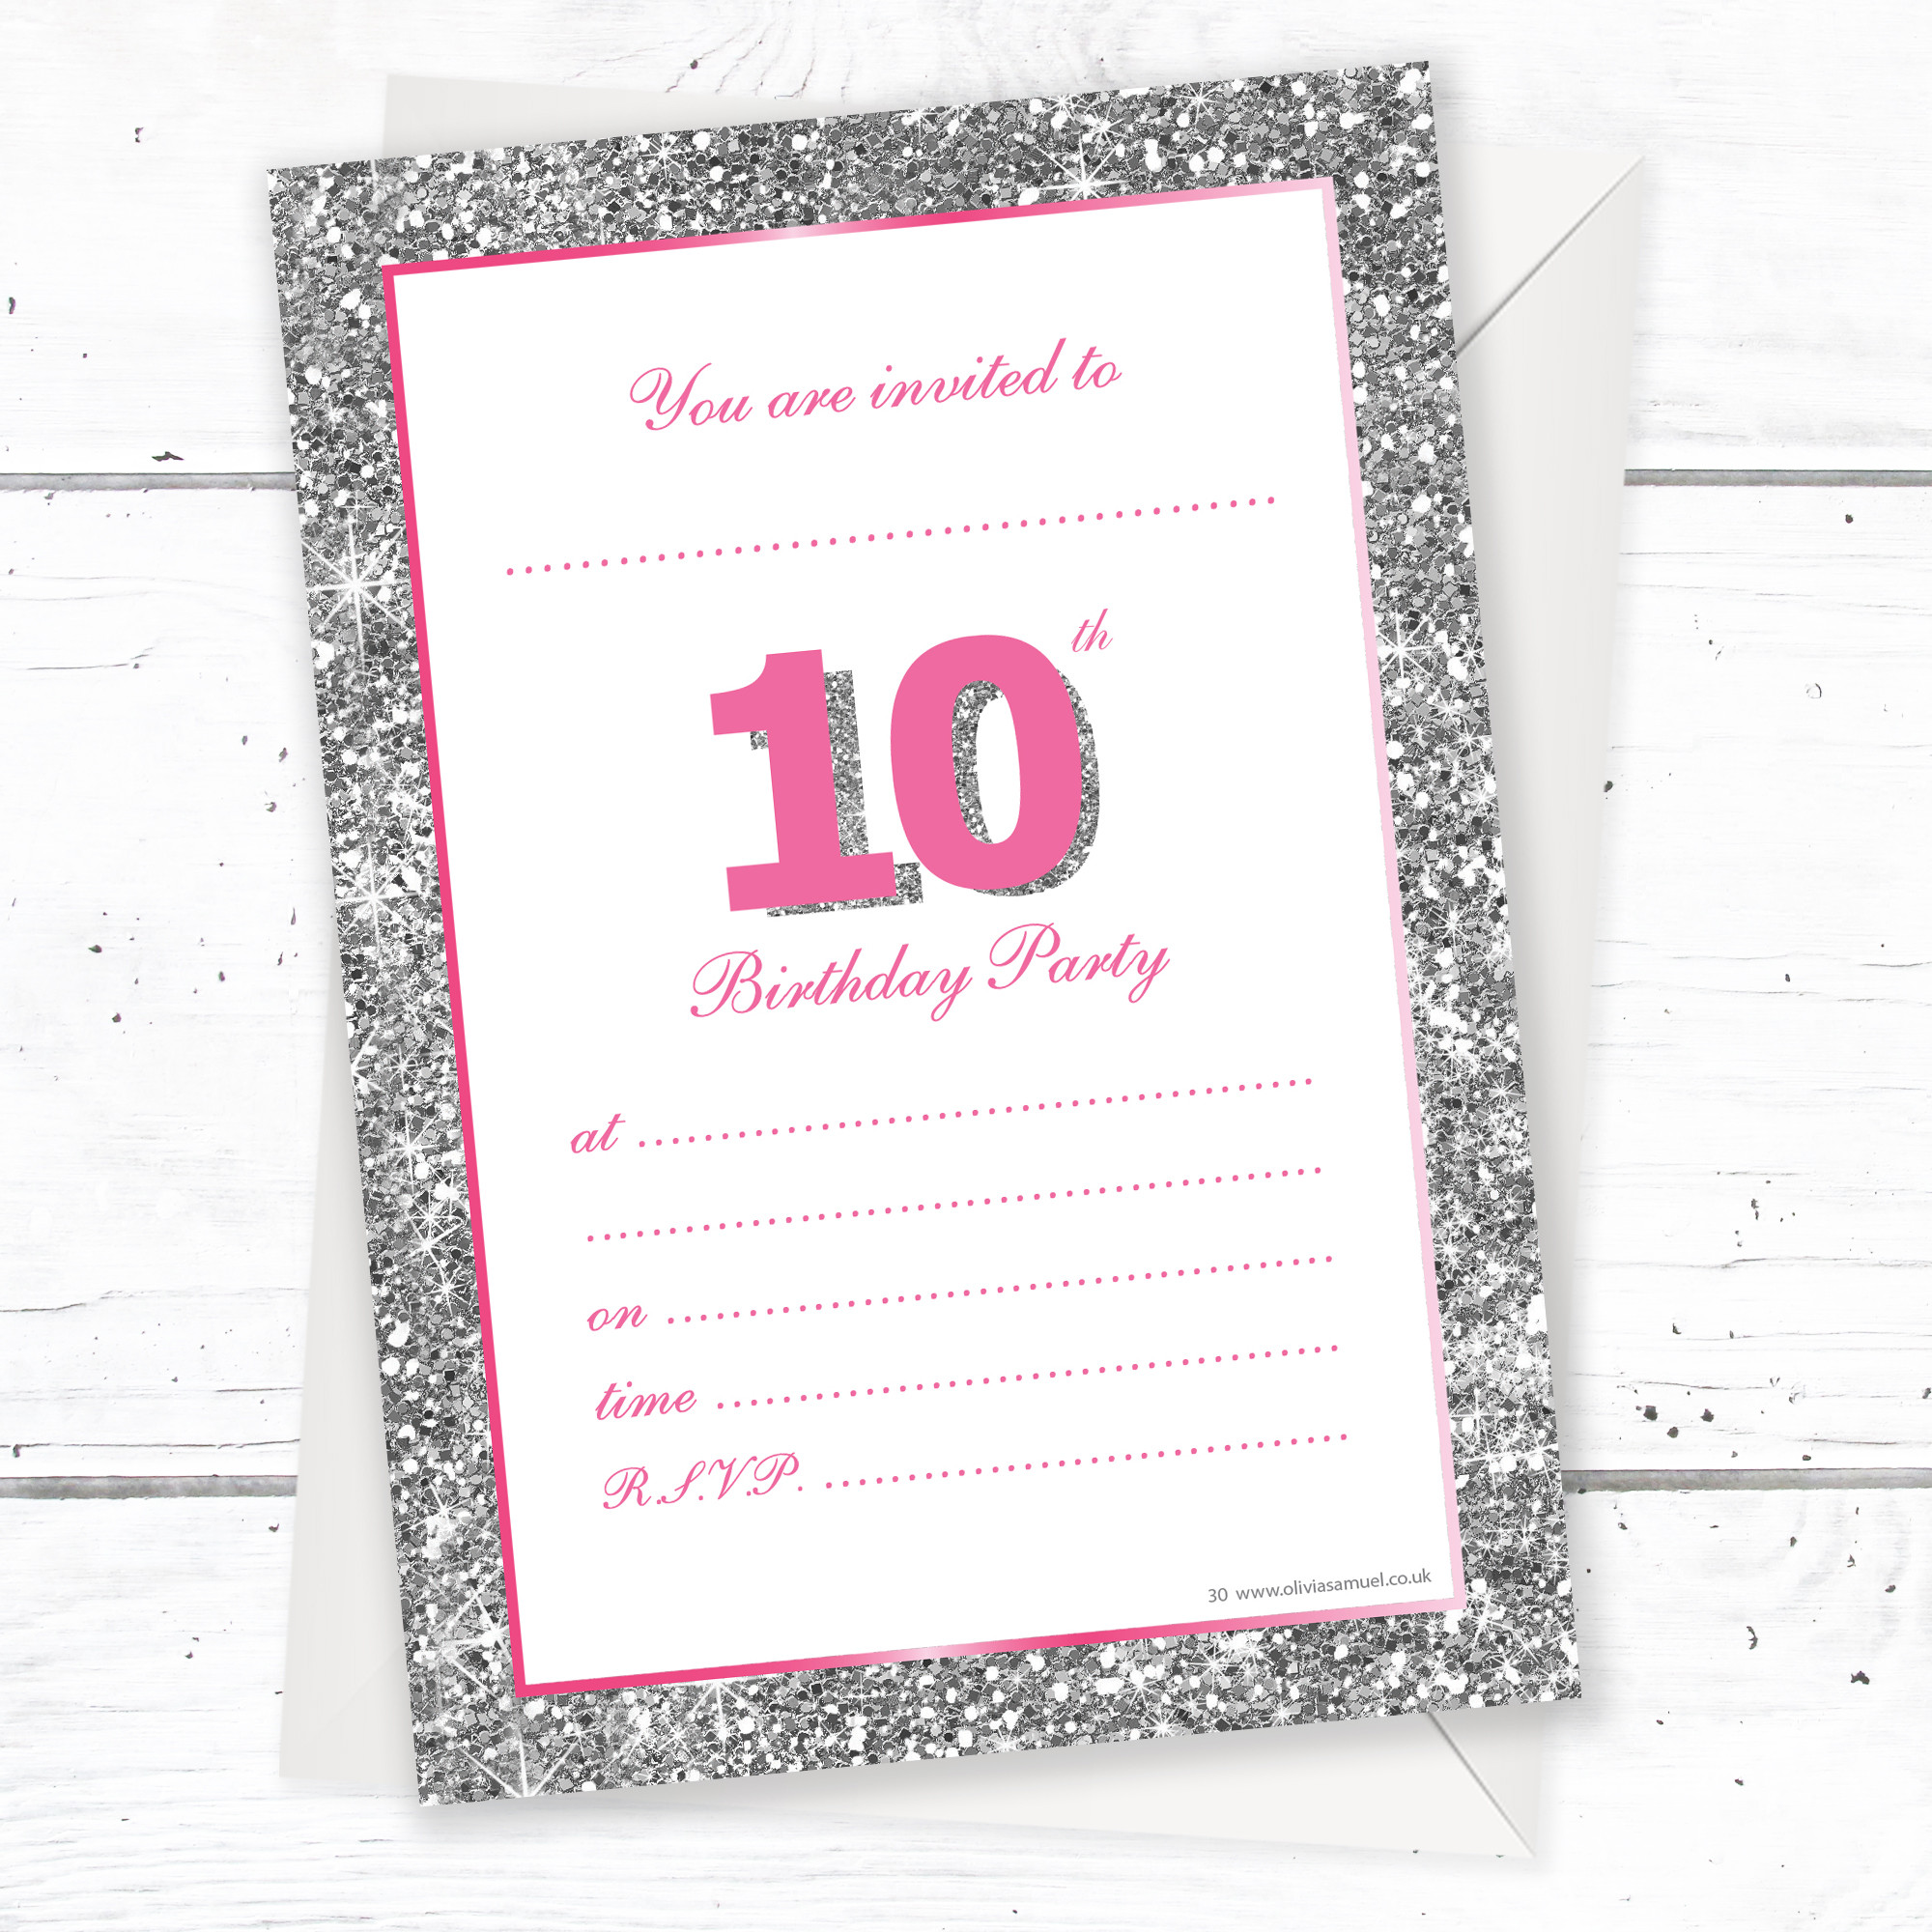 10th Birthday Invitation
 10th Birthday Party Invitations – Pink Sparkly Design and